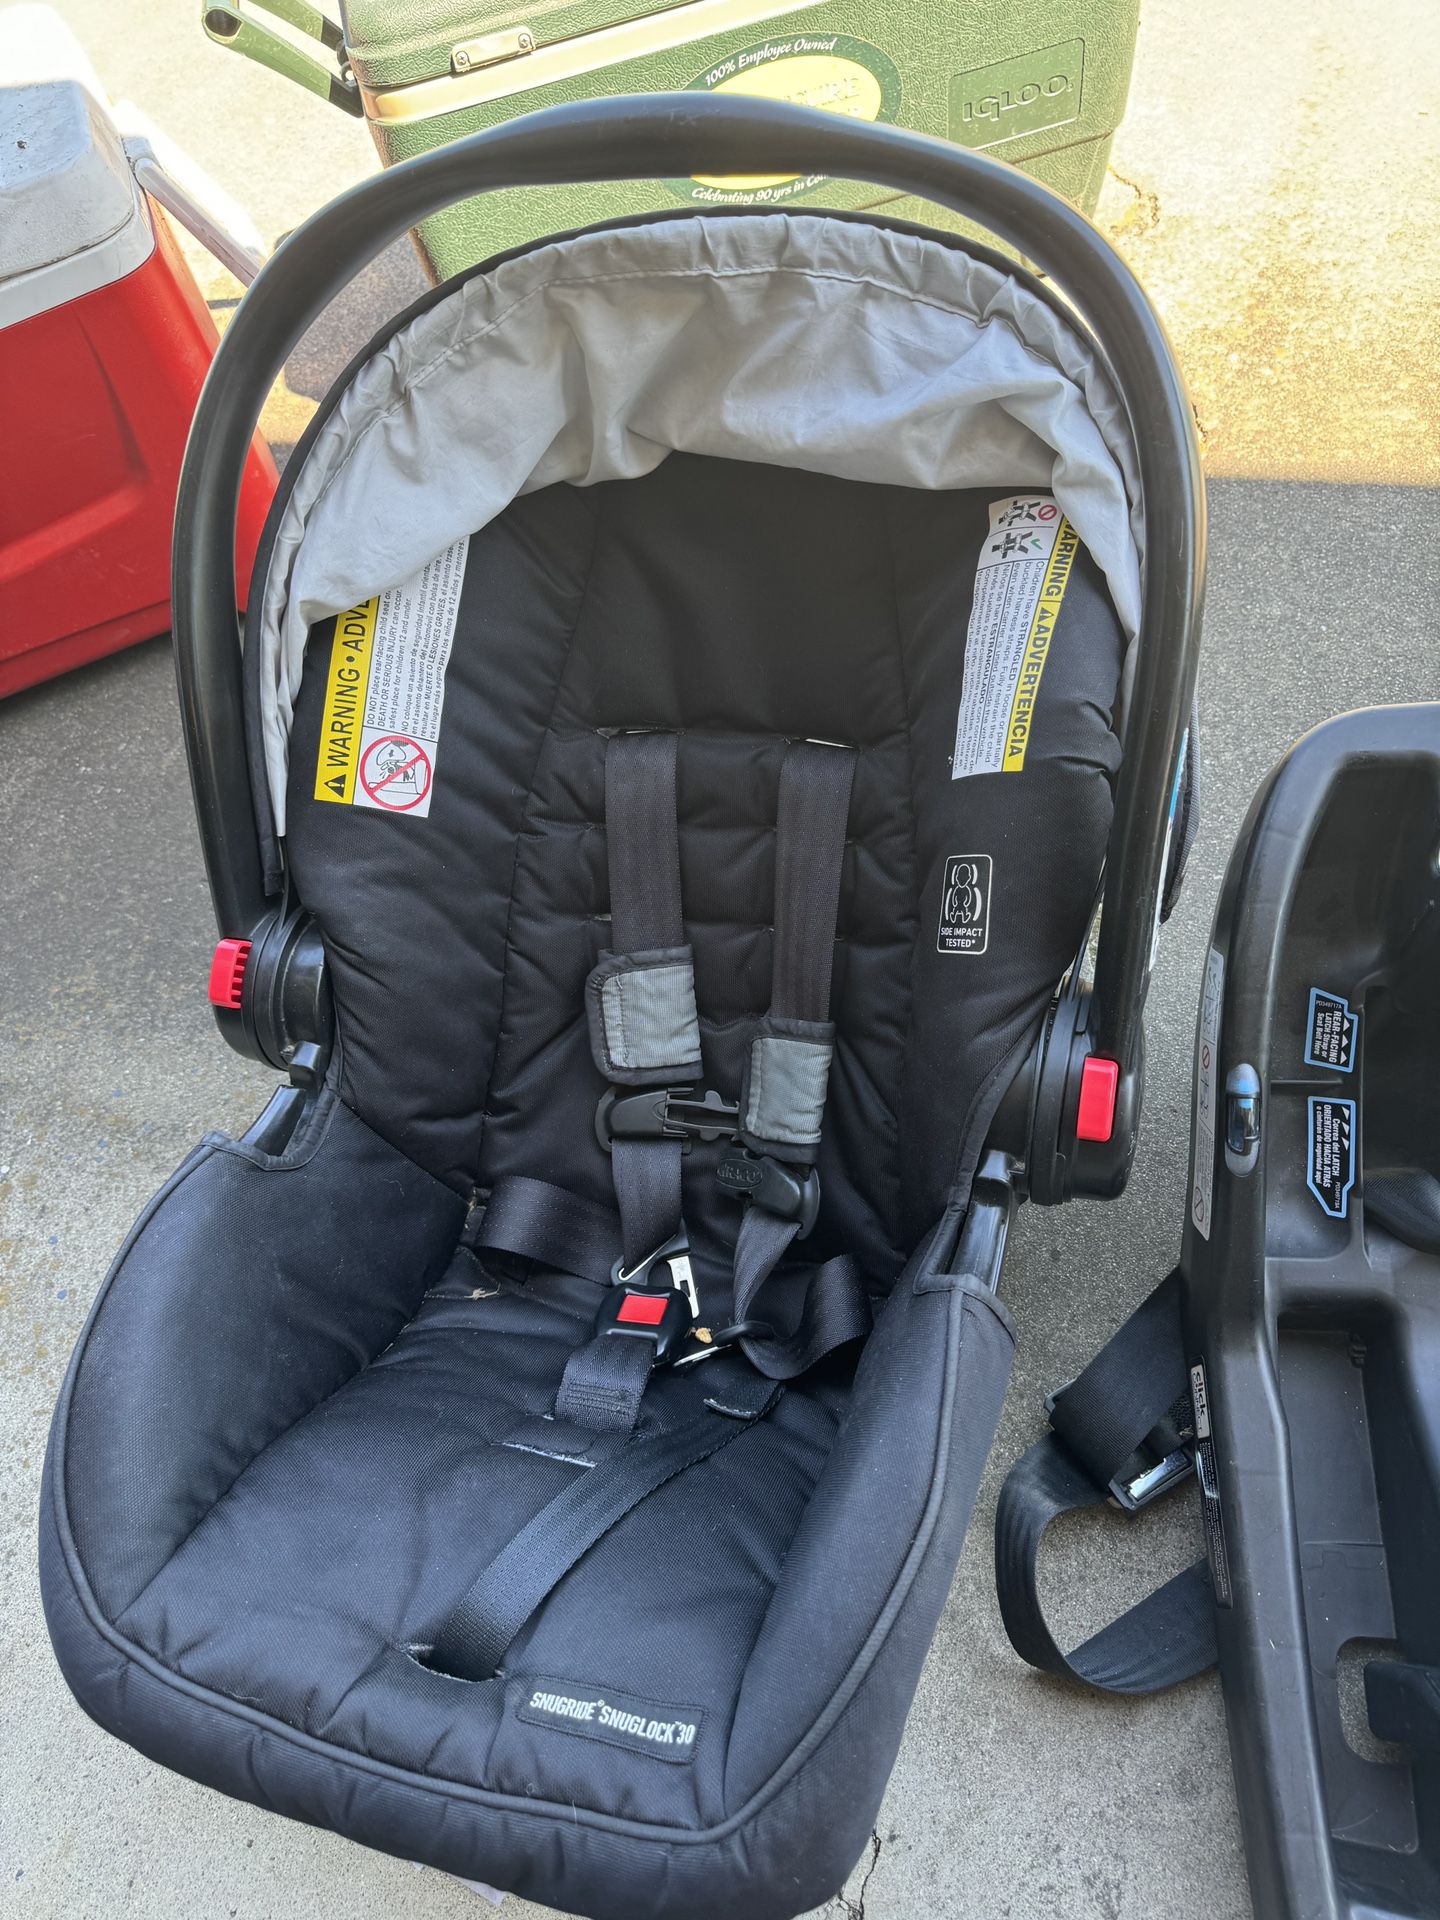 Car seat And 3 Bases